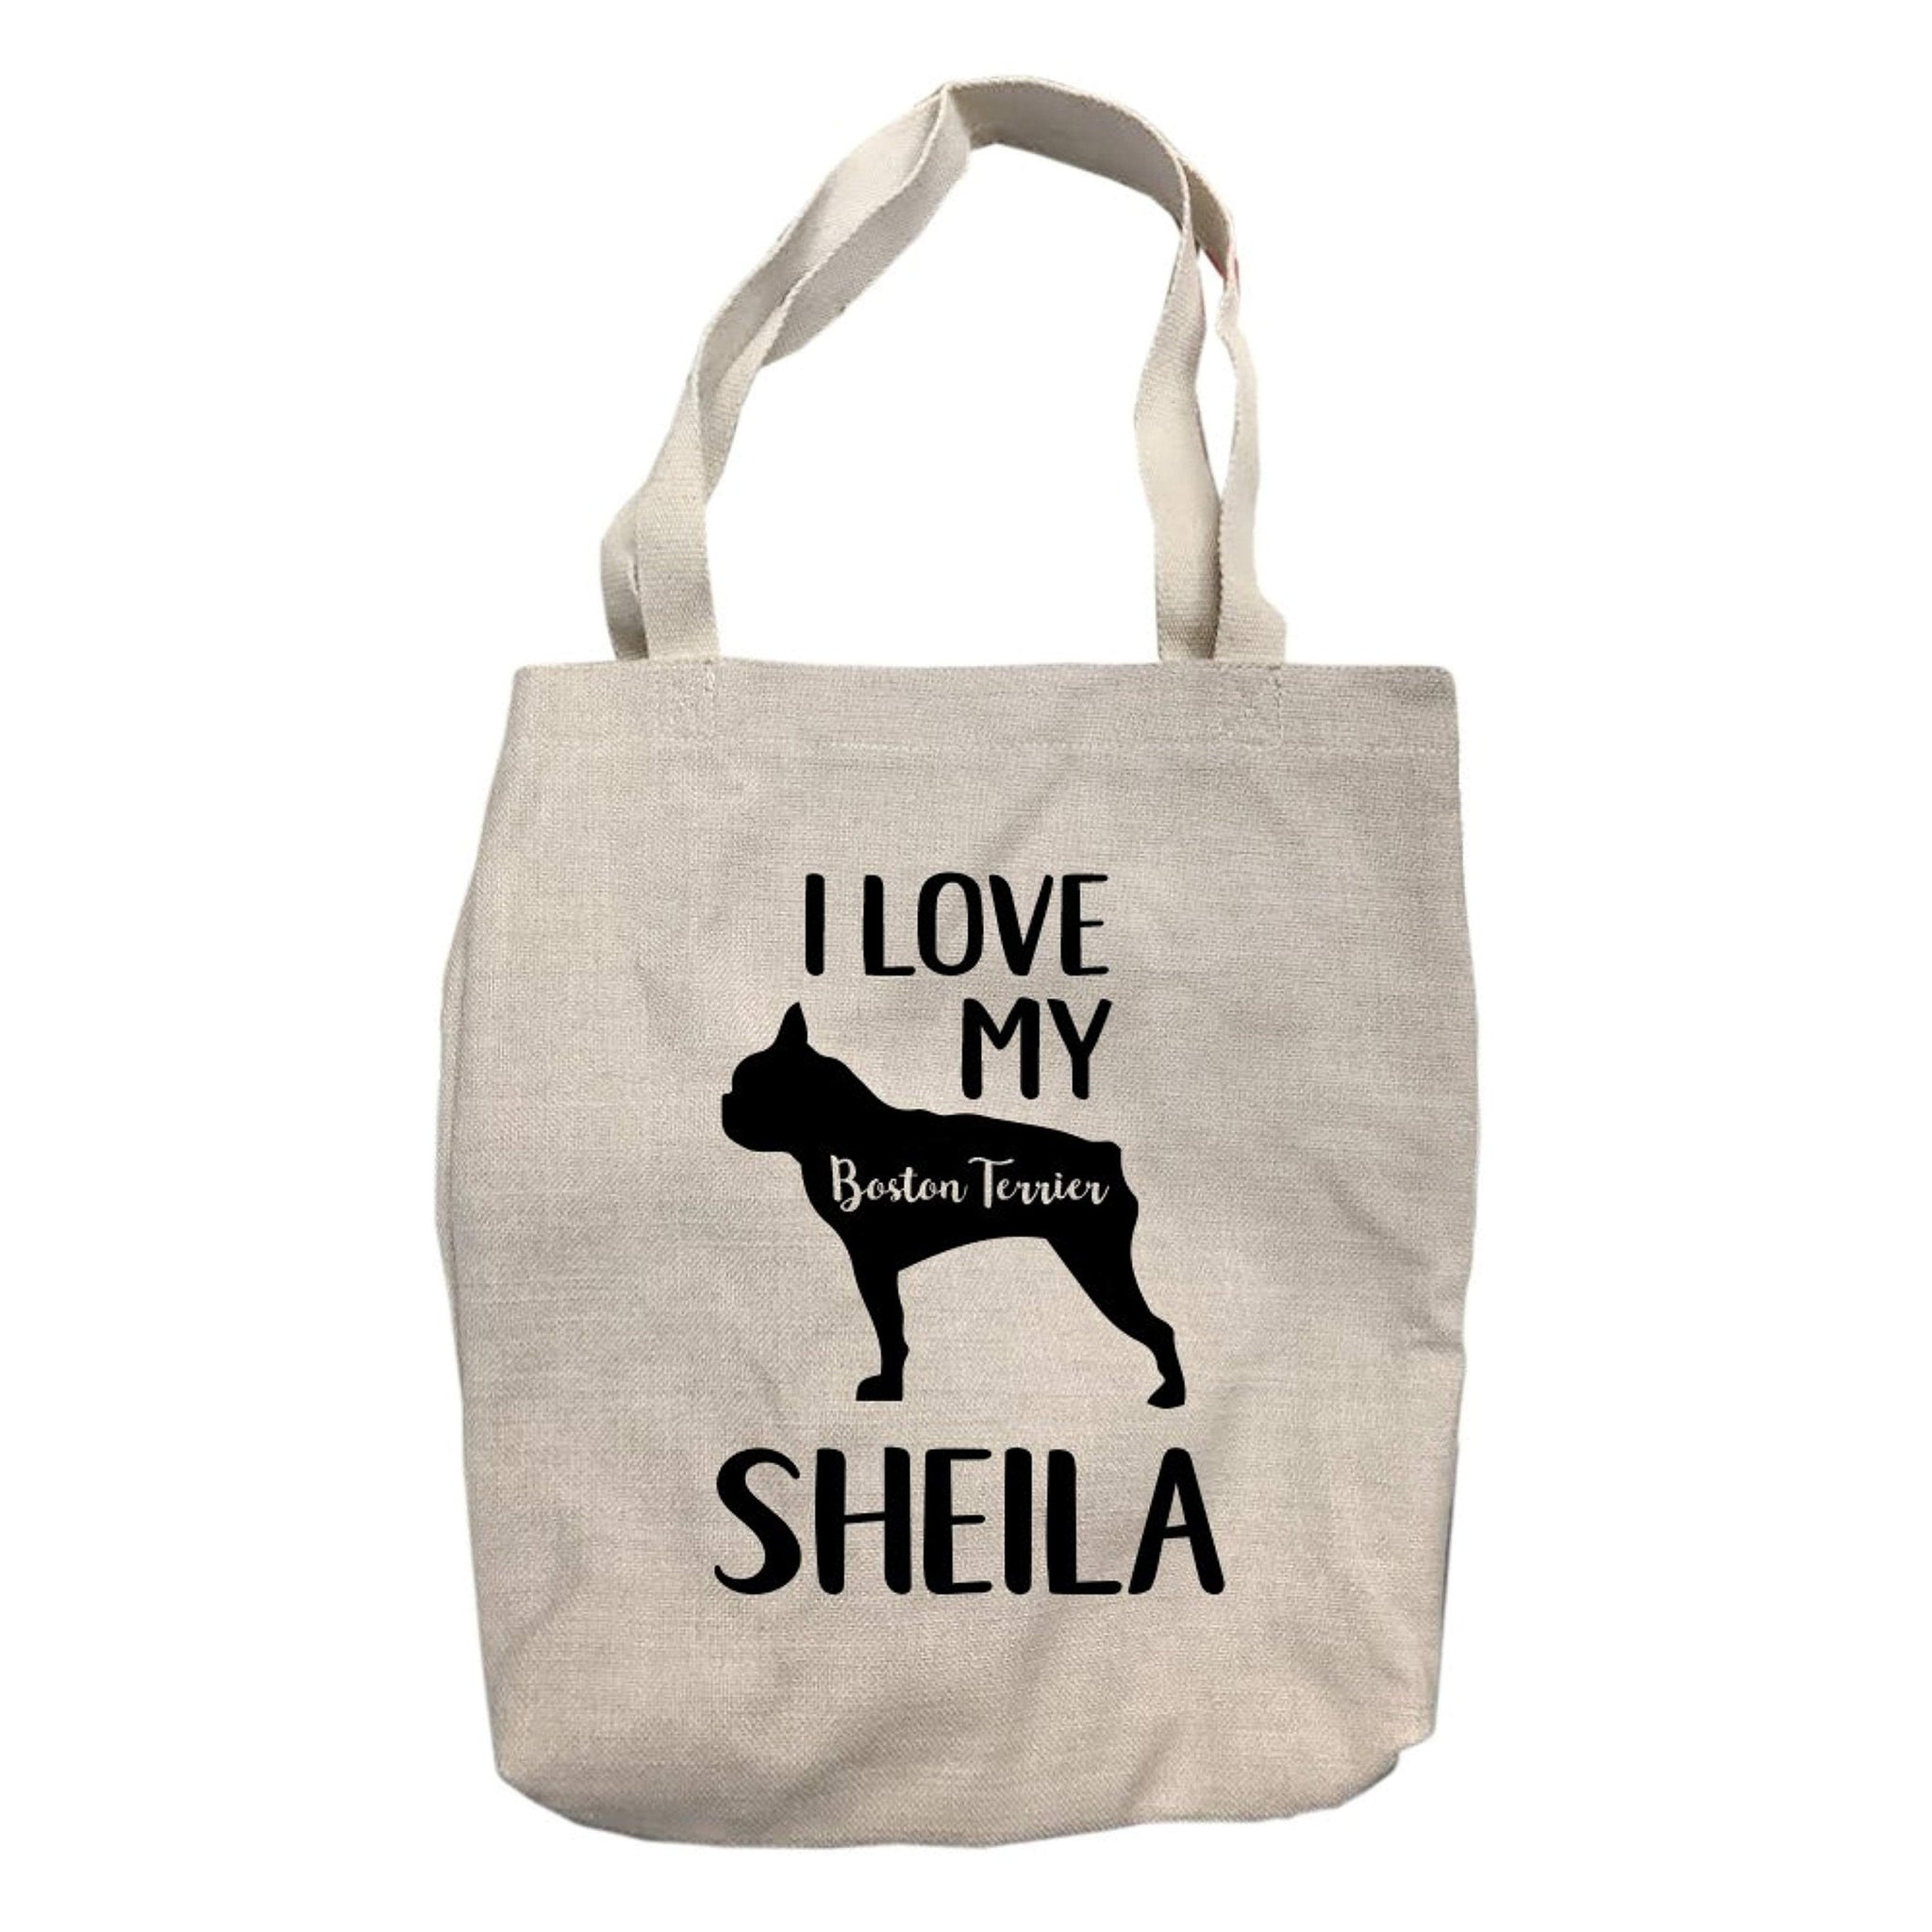 Personalized I Love My Boston Terrier Tote Bag